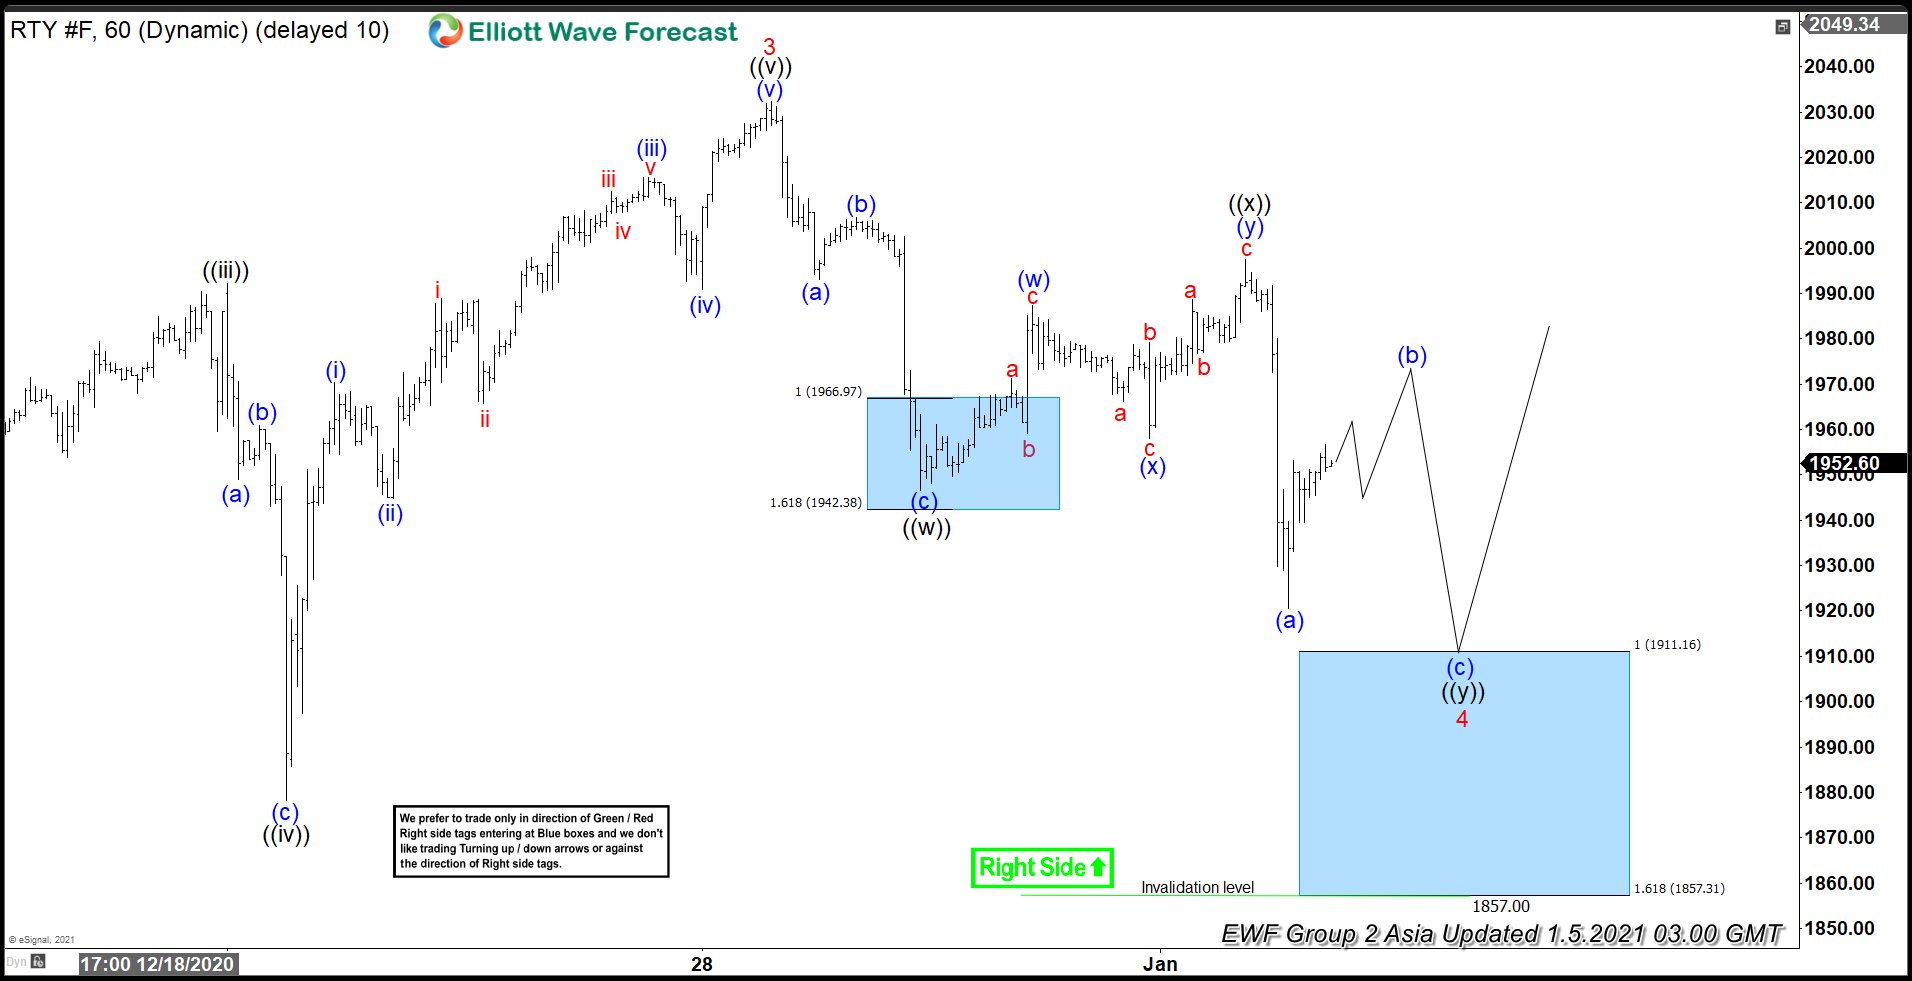 Elliott Wave View: Support Areas for Russell 2000